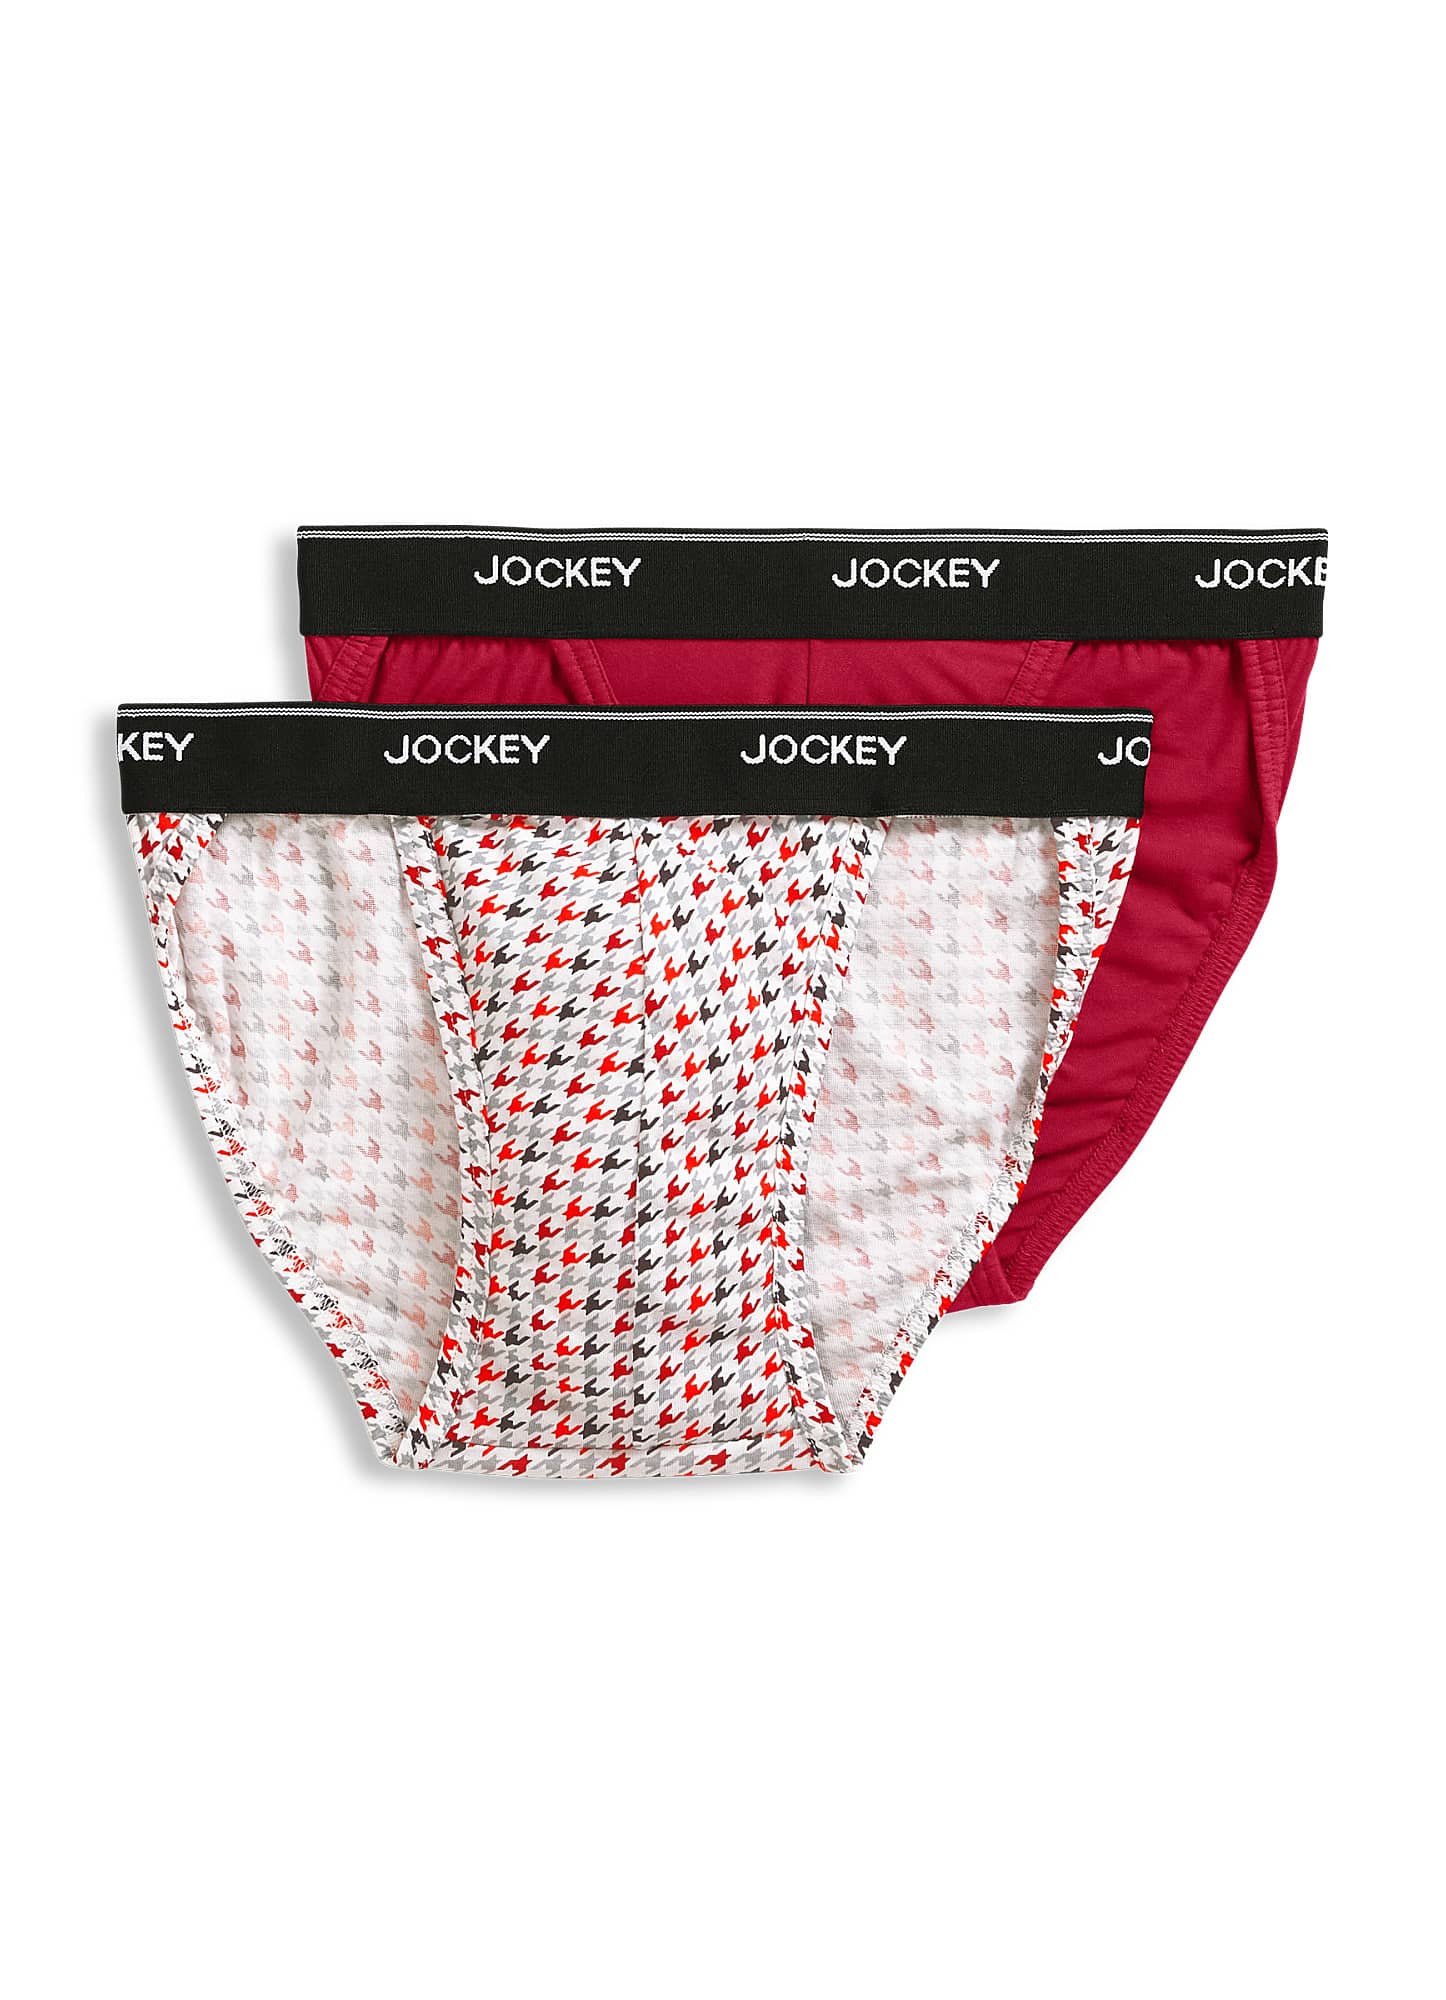 Wholesale Jockey String Bikini Mens Products at Factory Prices from  Manufacturers in China, India, Korea, etc.